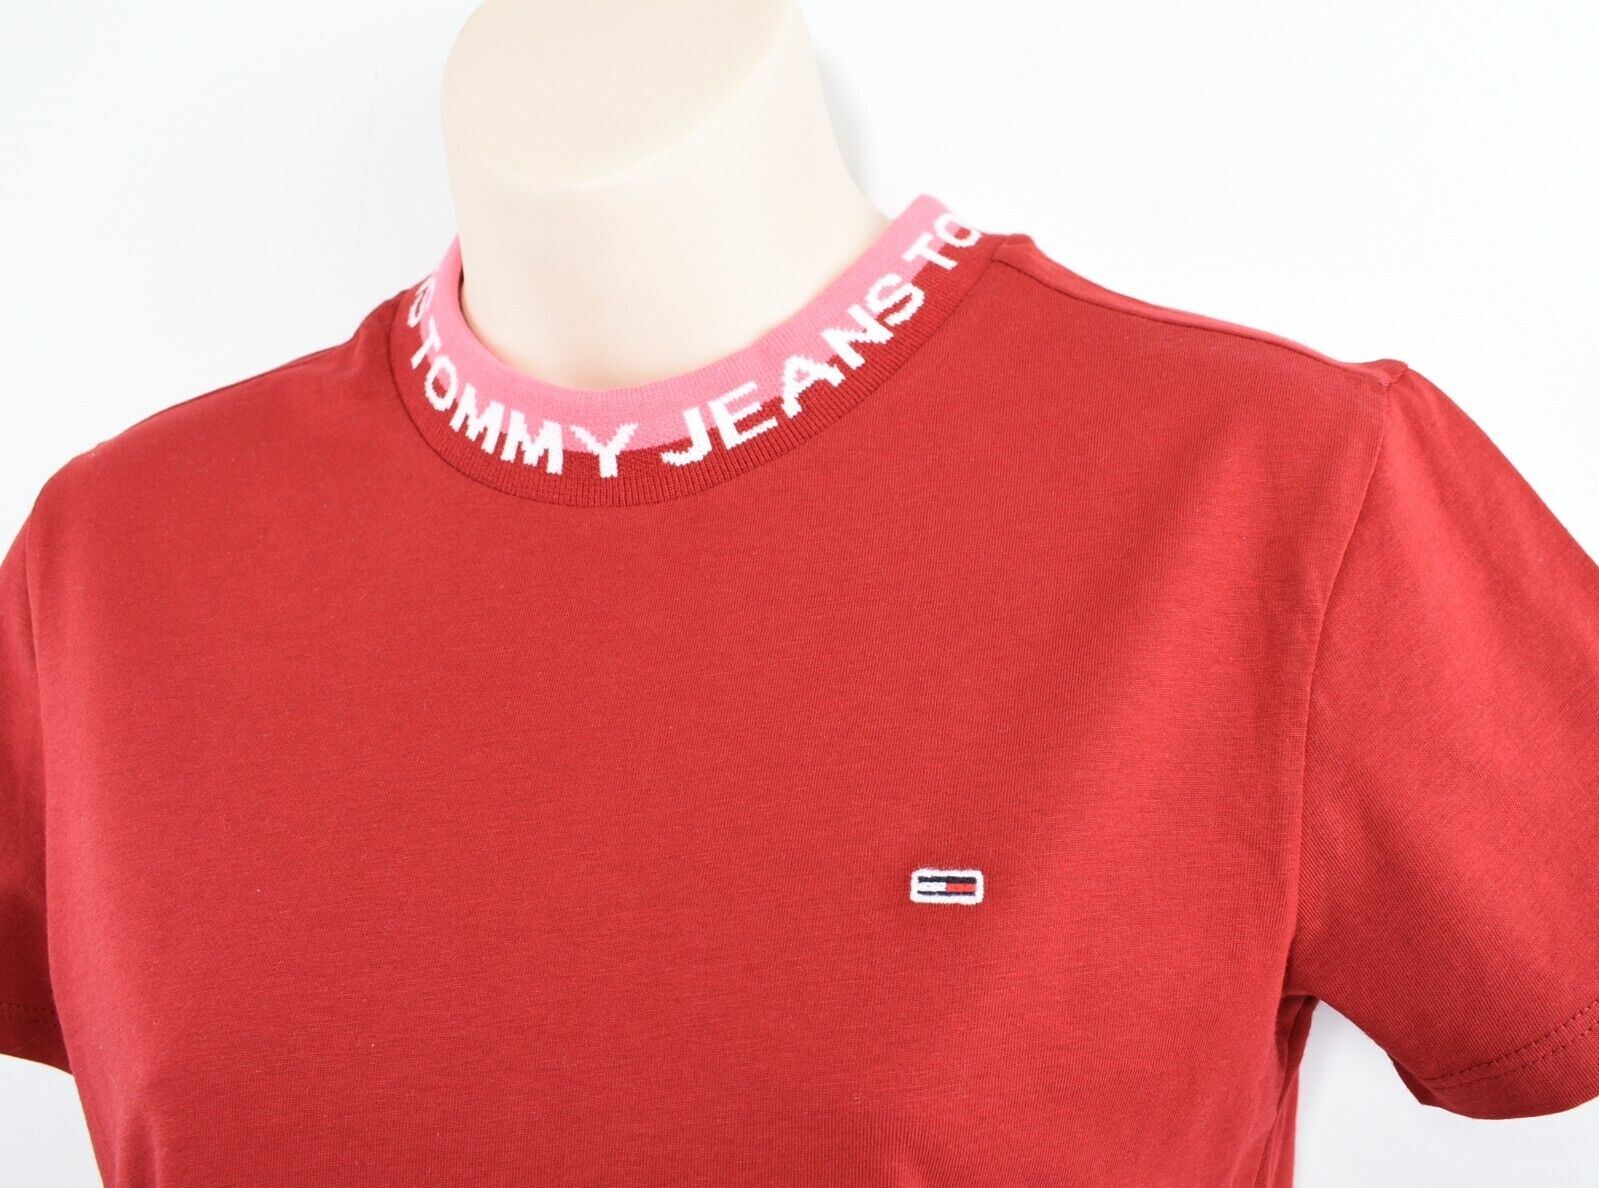 TOMMY HILFIGER Women's Logo Neck Cropped T-shirt, Wine Red, size S /UK 10